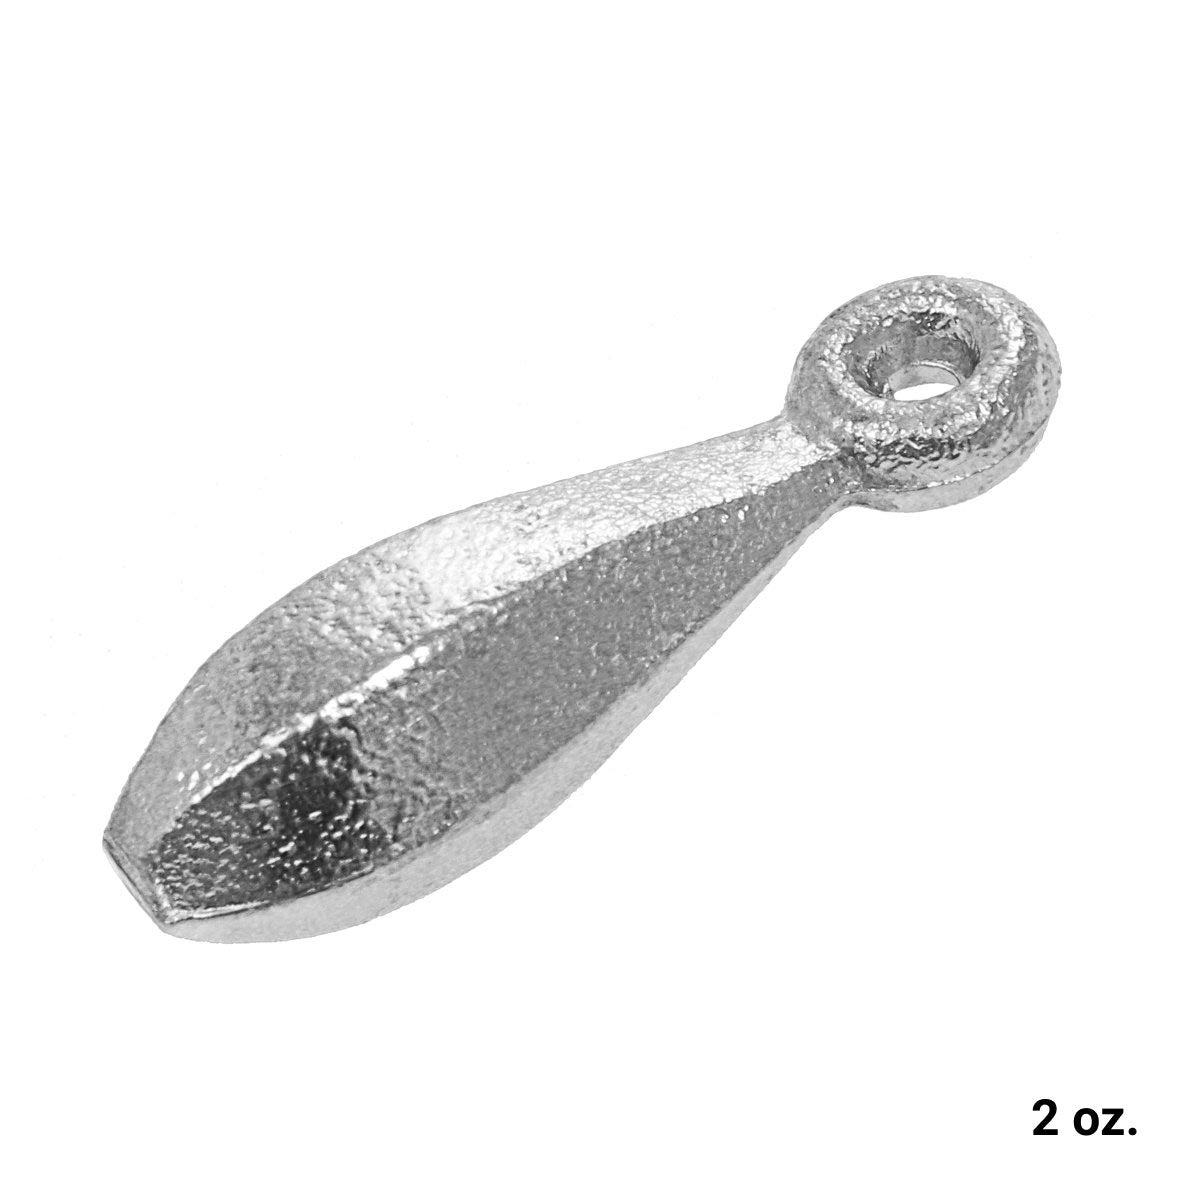 Pin Lead Sinker for Fishing, Freshwater and Saltwater Fishing Weight (1 oz, 2 oz, 5 oz)